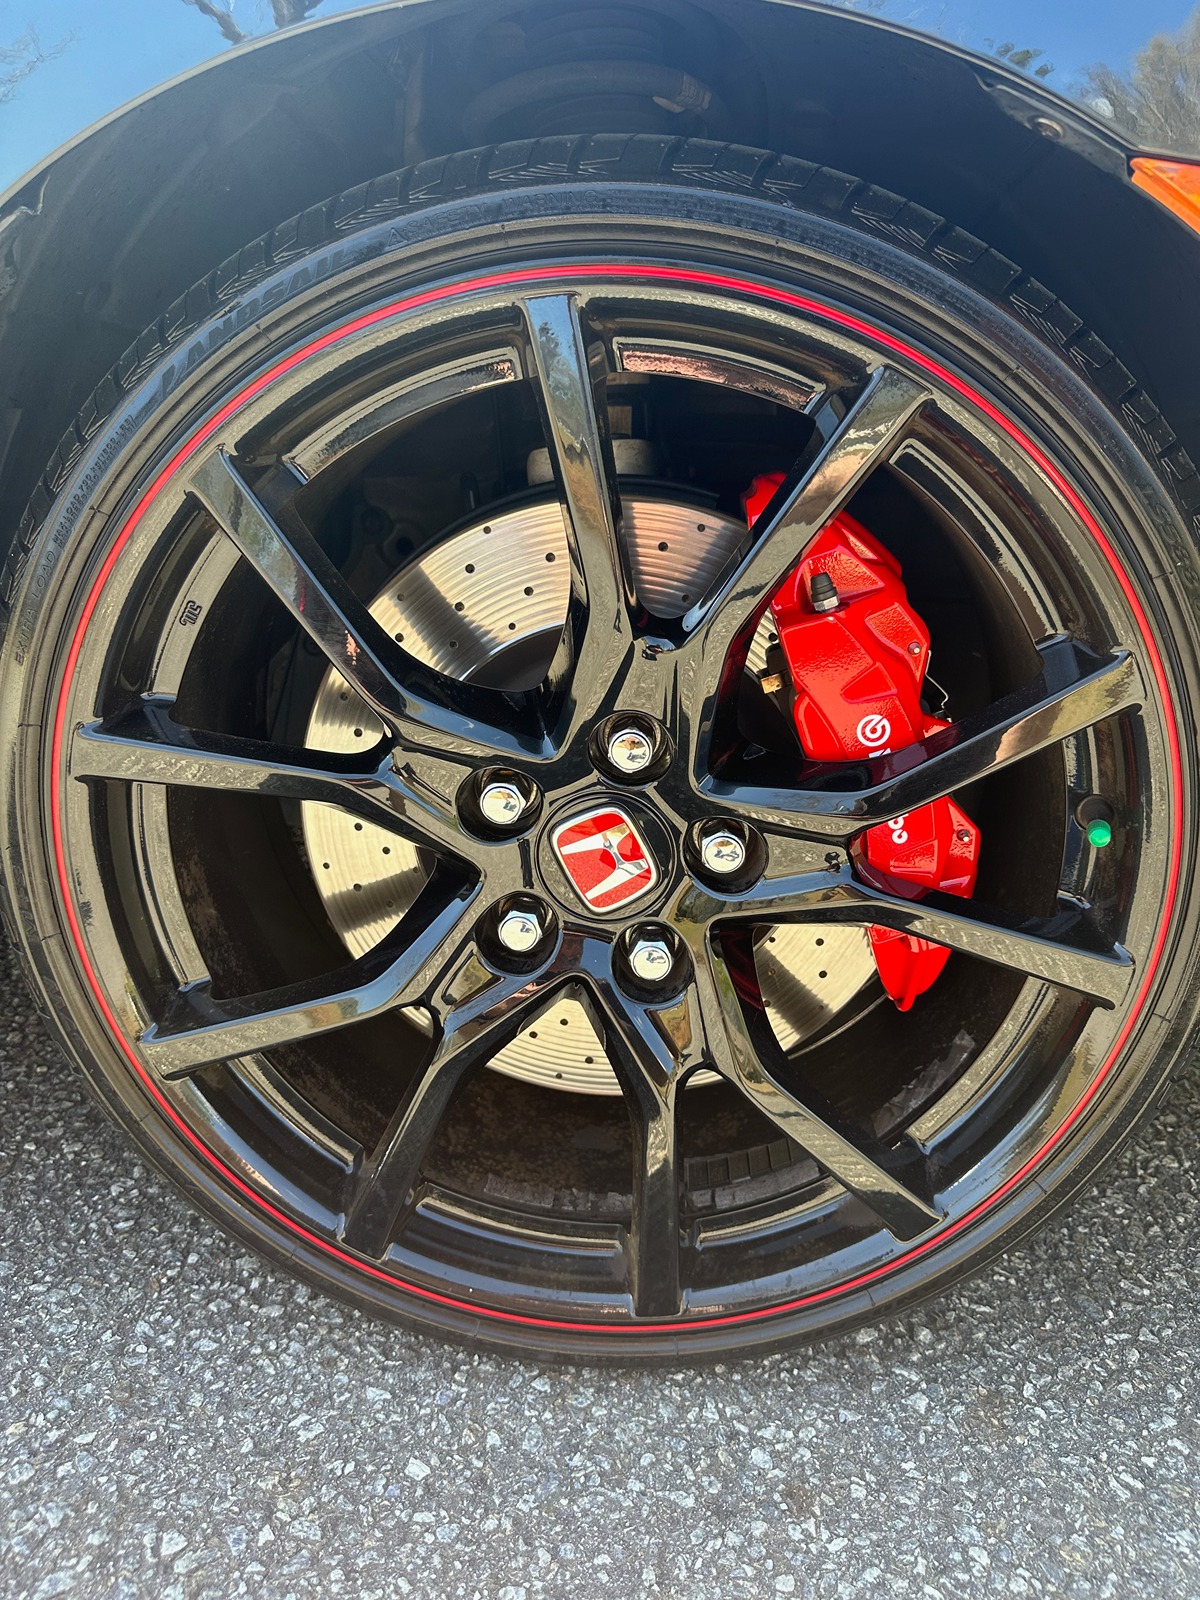 Honda Civic 10th gen Sold. 2019 Civic Type R for sale IMG_8127